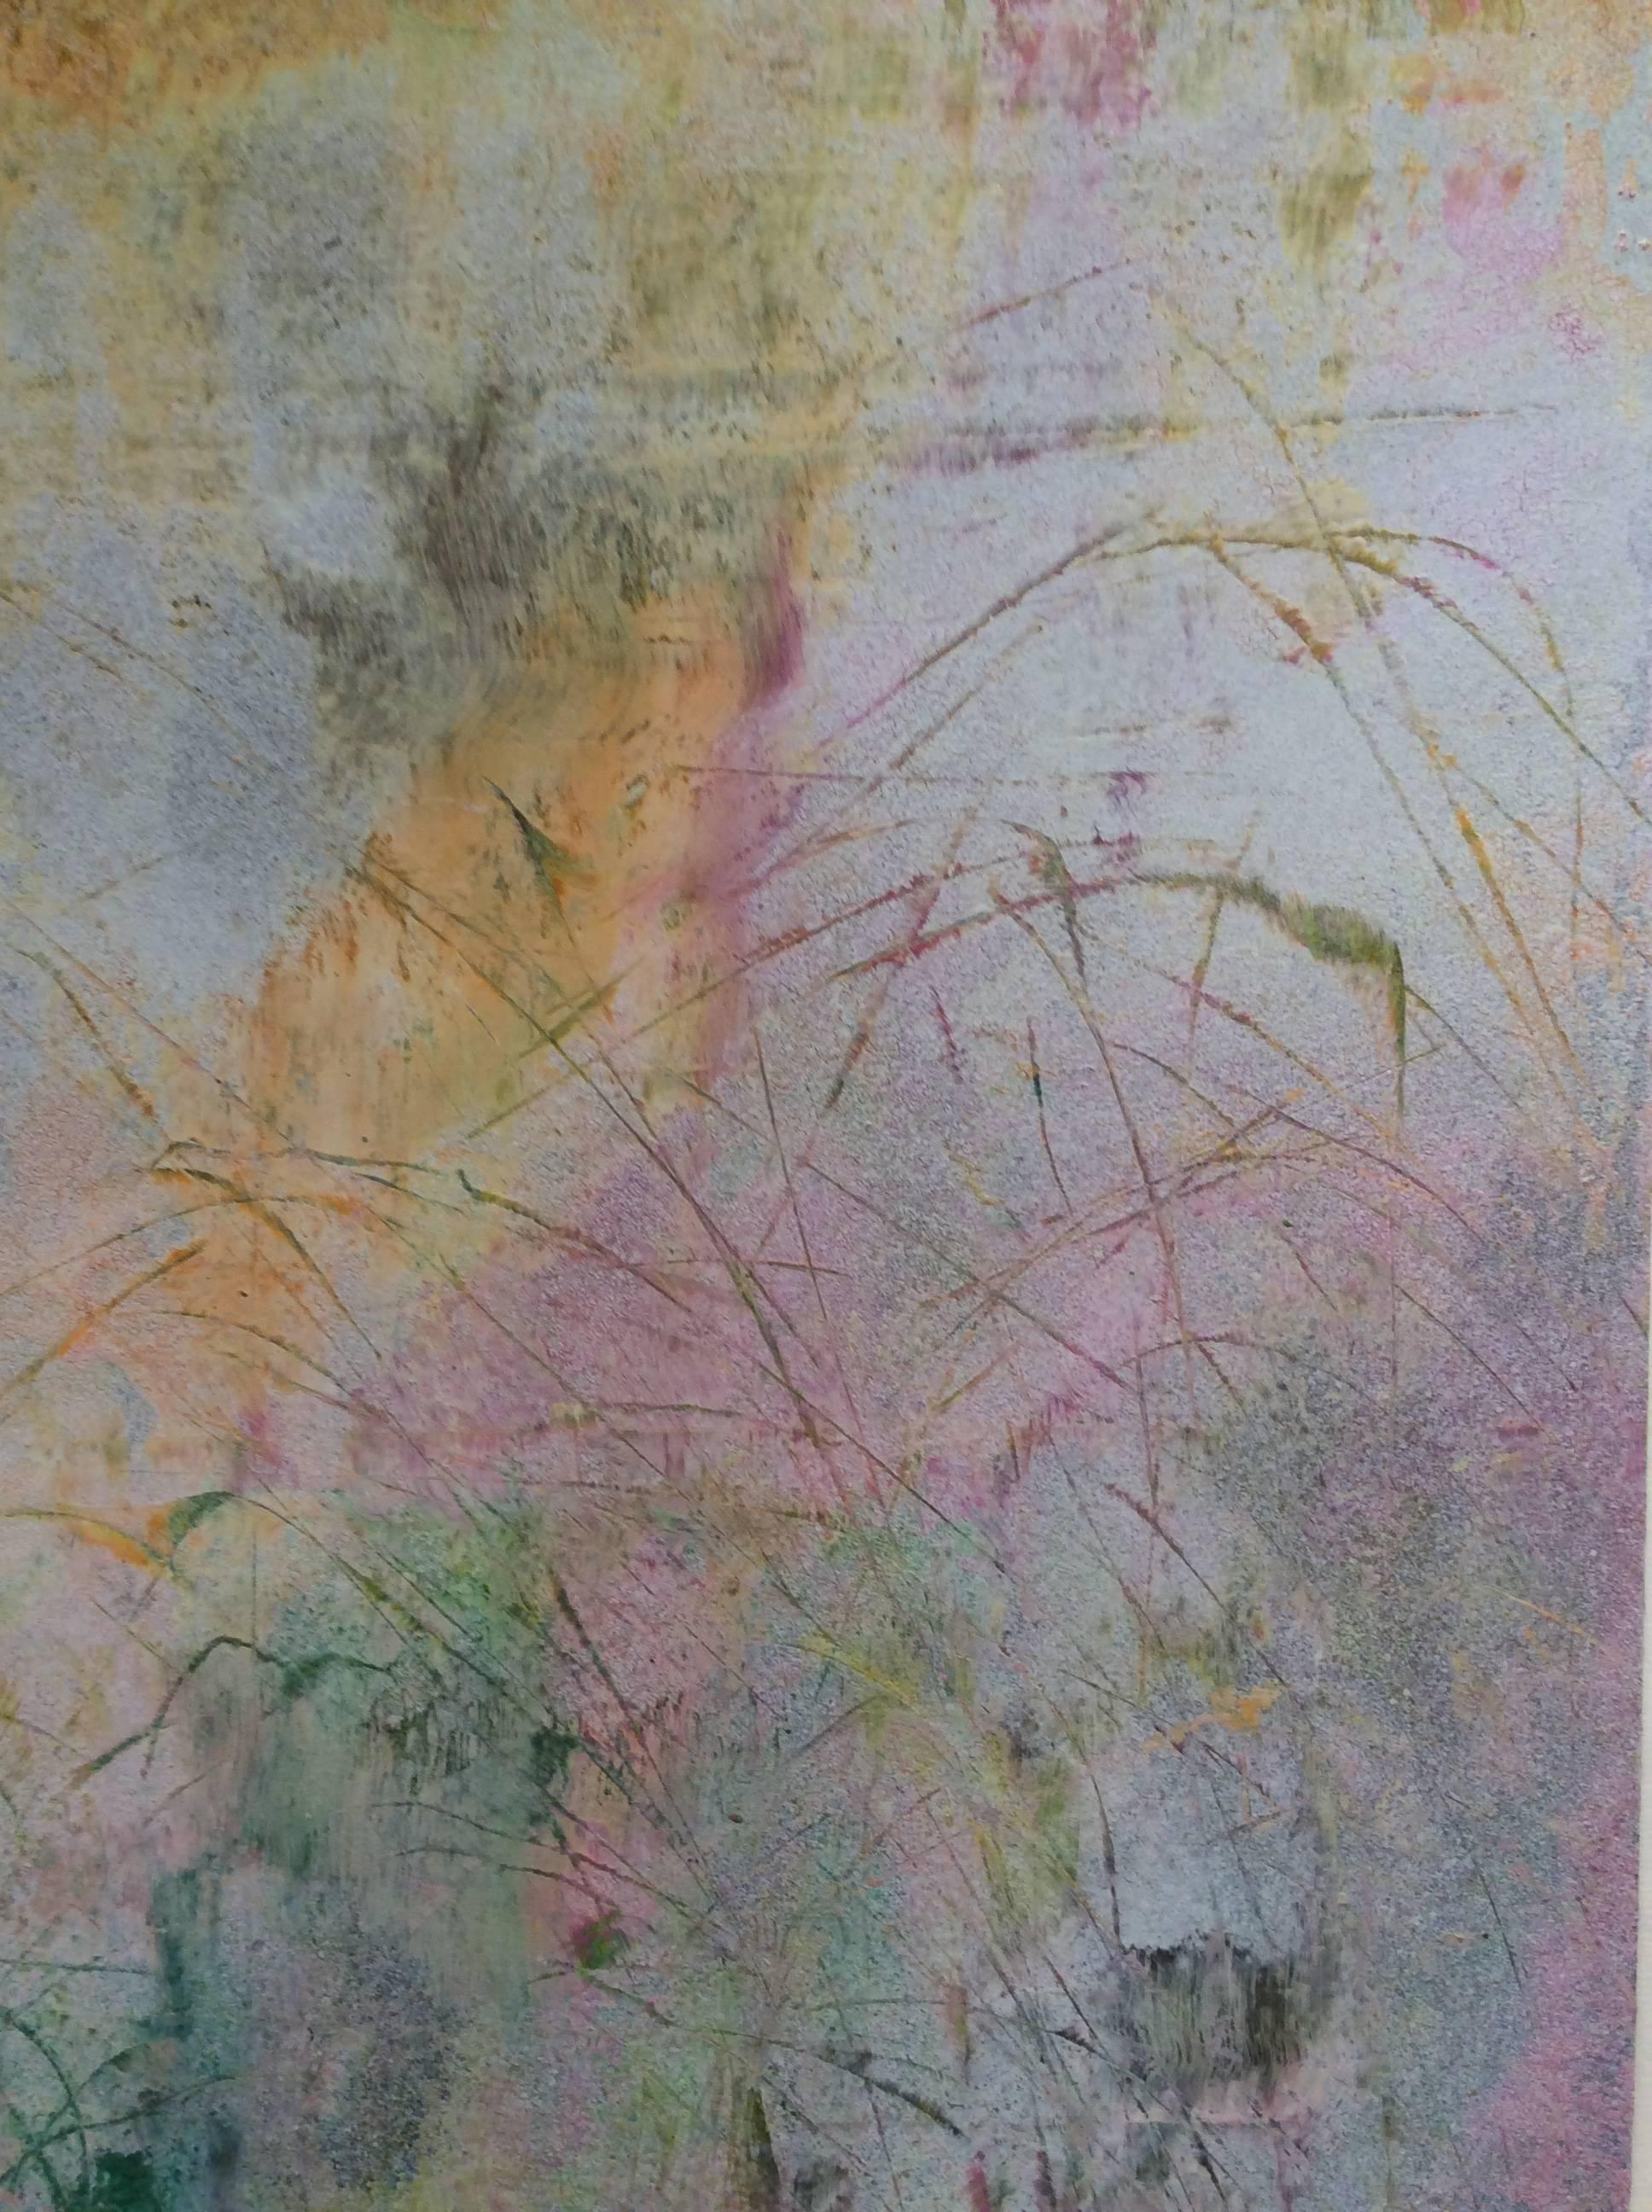 Serene Reflection (Abstract Pastel Palette Painting on Paper) by Bruce Murphy
enamel paint and metallic powders on archival paper
12 x 9 inches in 20 x 16 inch matte

This gestural abstract painting on paper was made by Hudson Valley based artist,